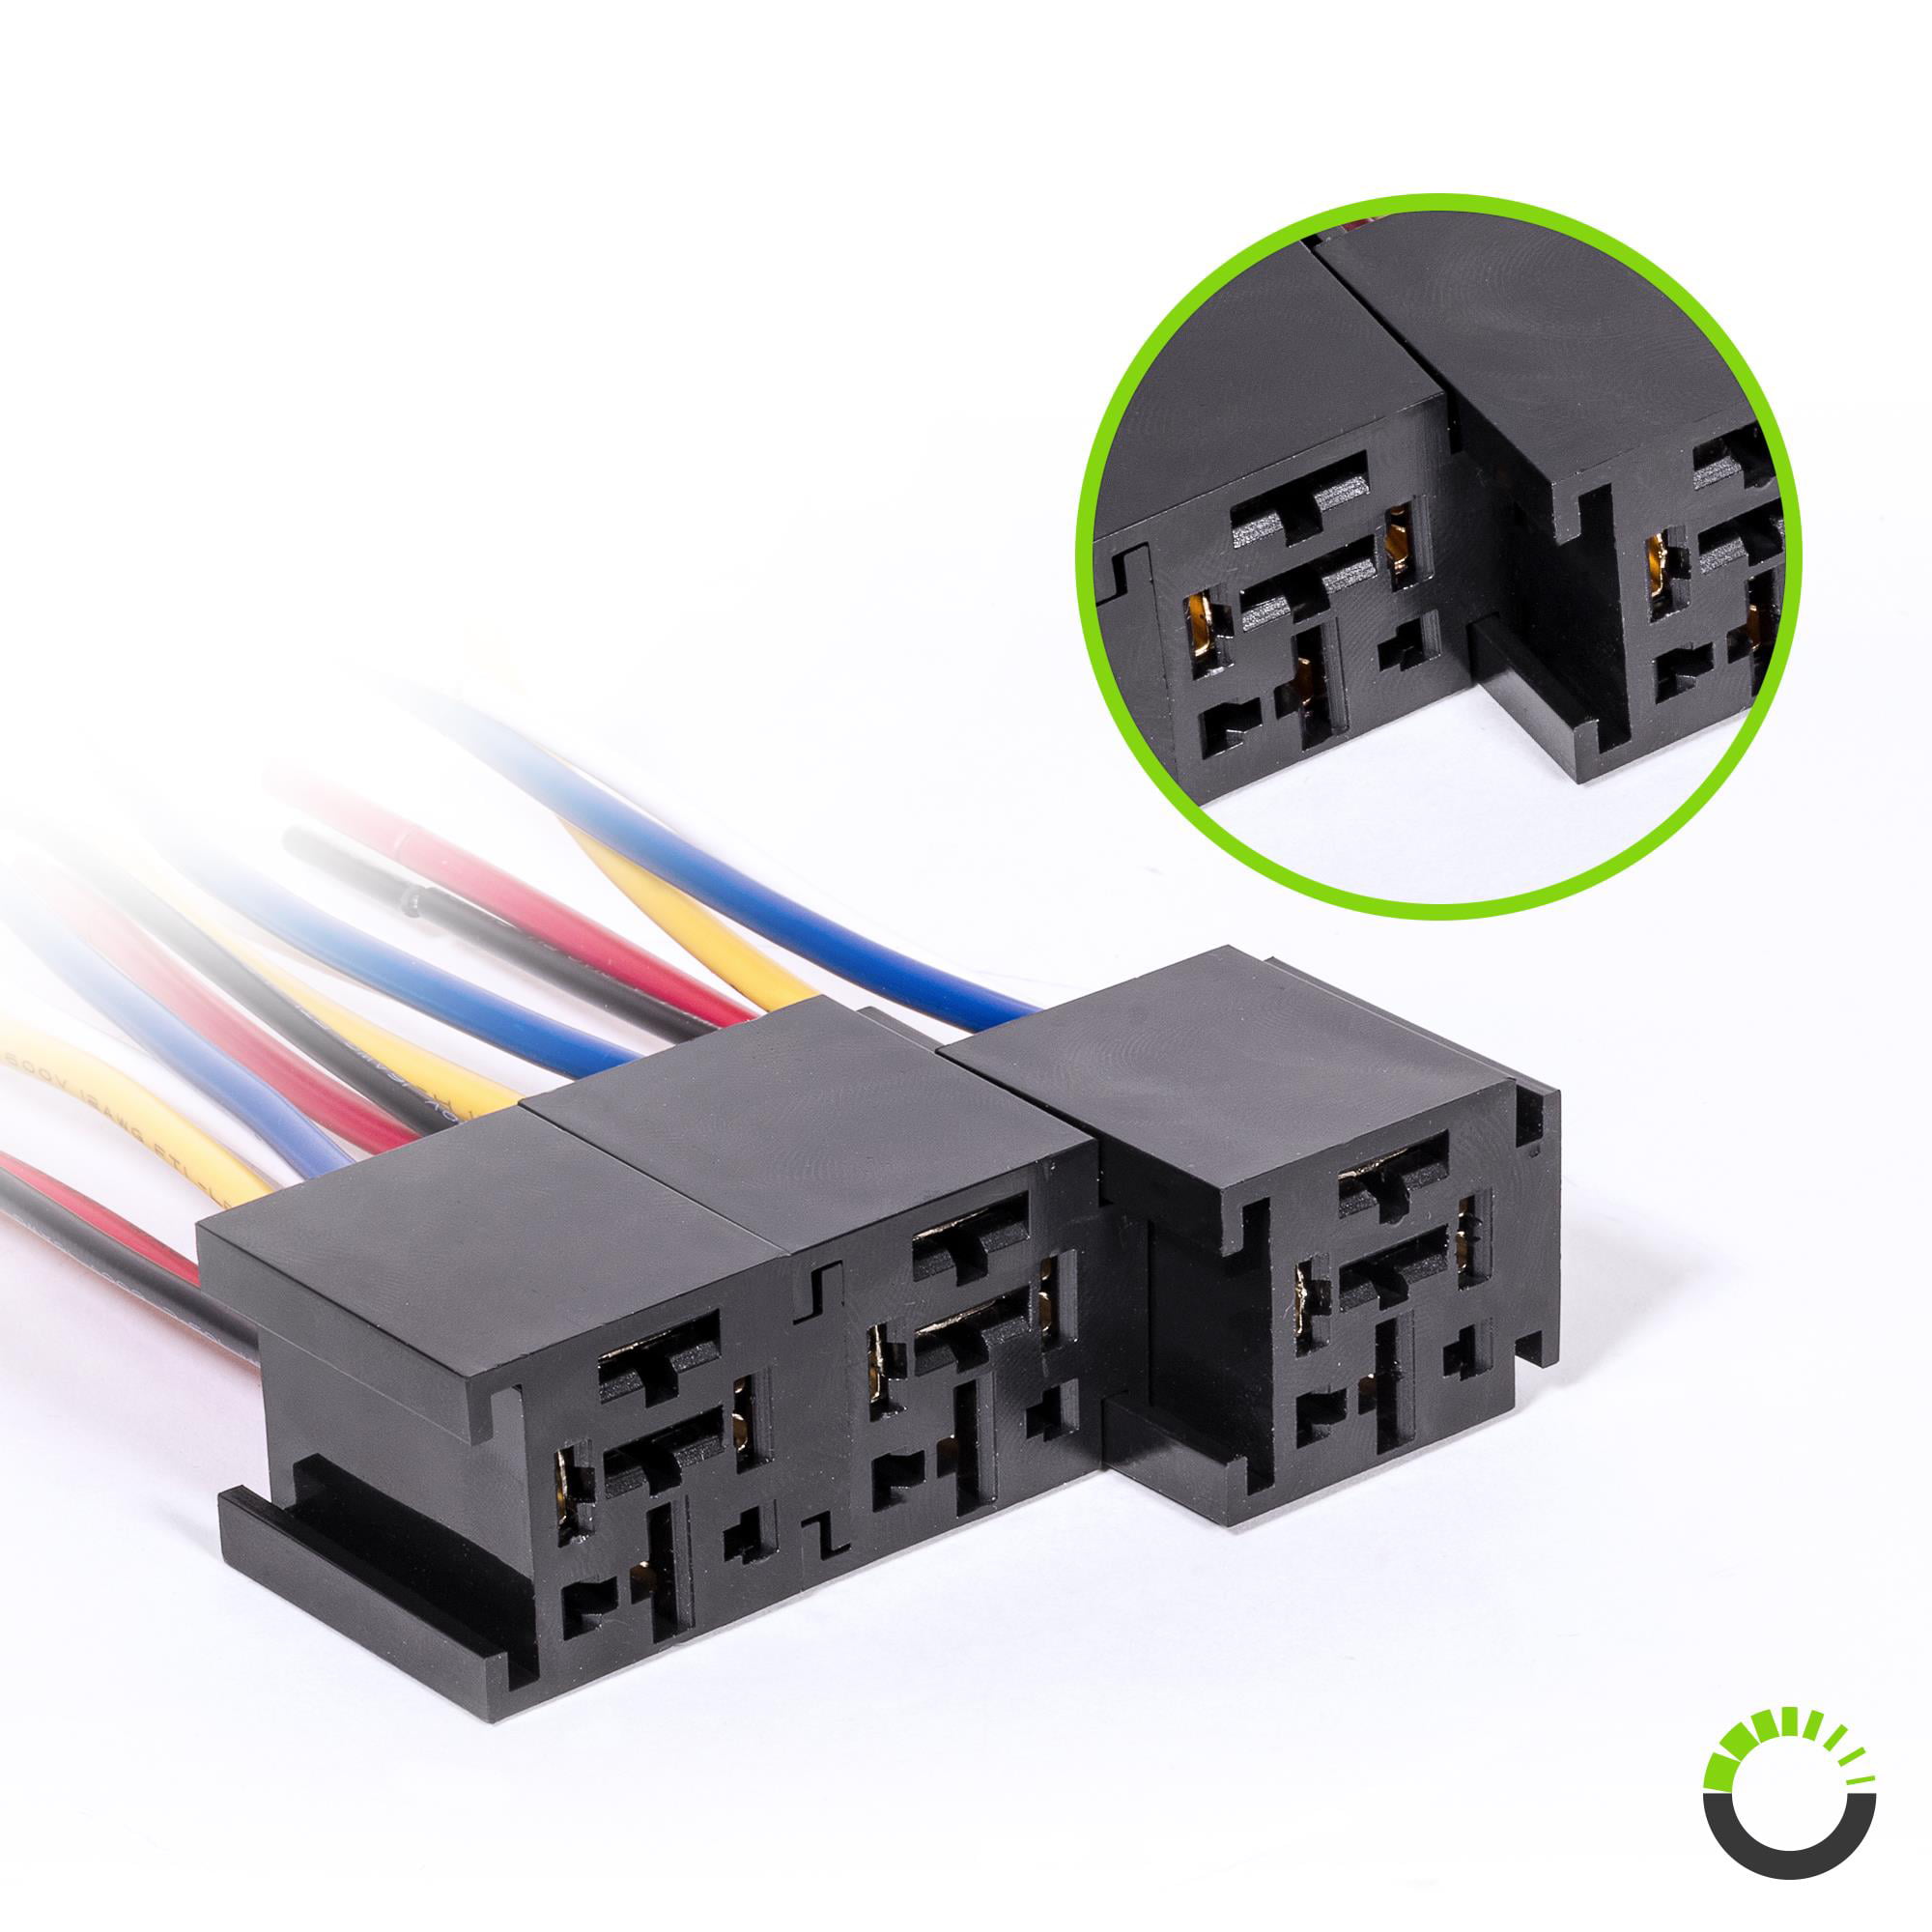 5 Pieces 12V SPDT 5 Pin Automotive Relay with 5 Wires Harness Socket 80 Amp